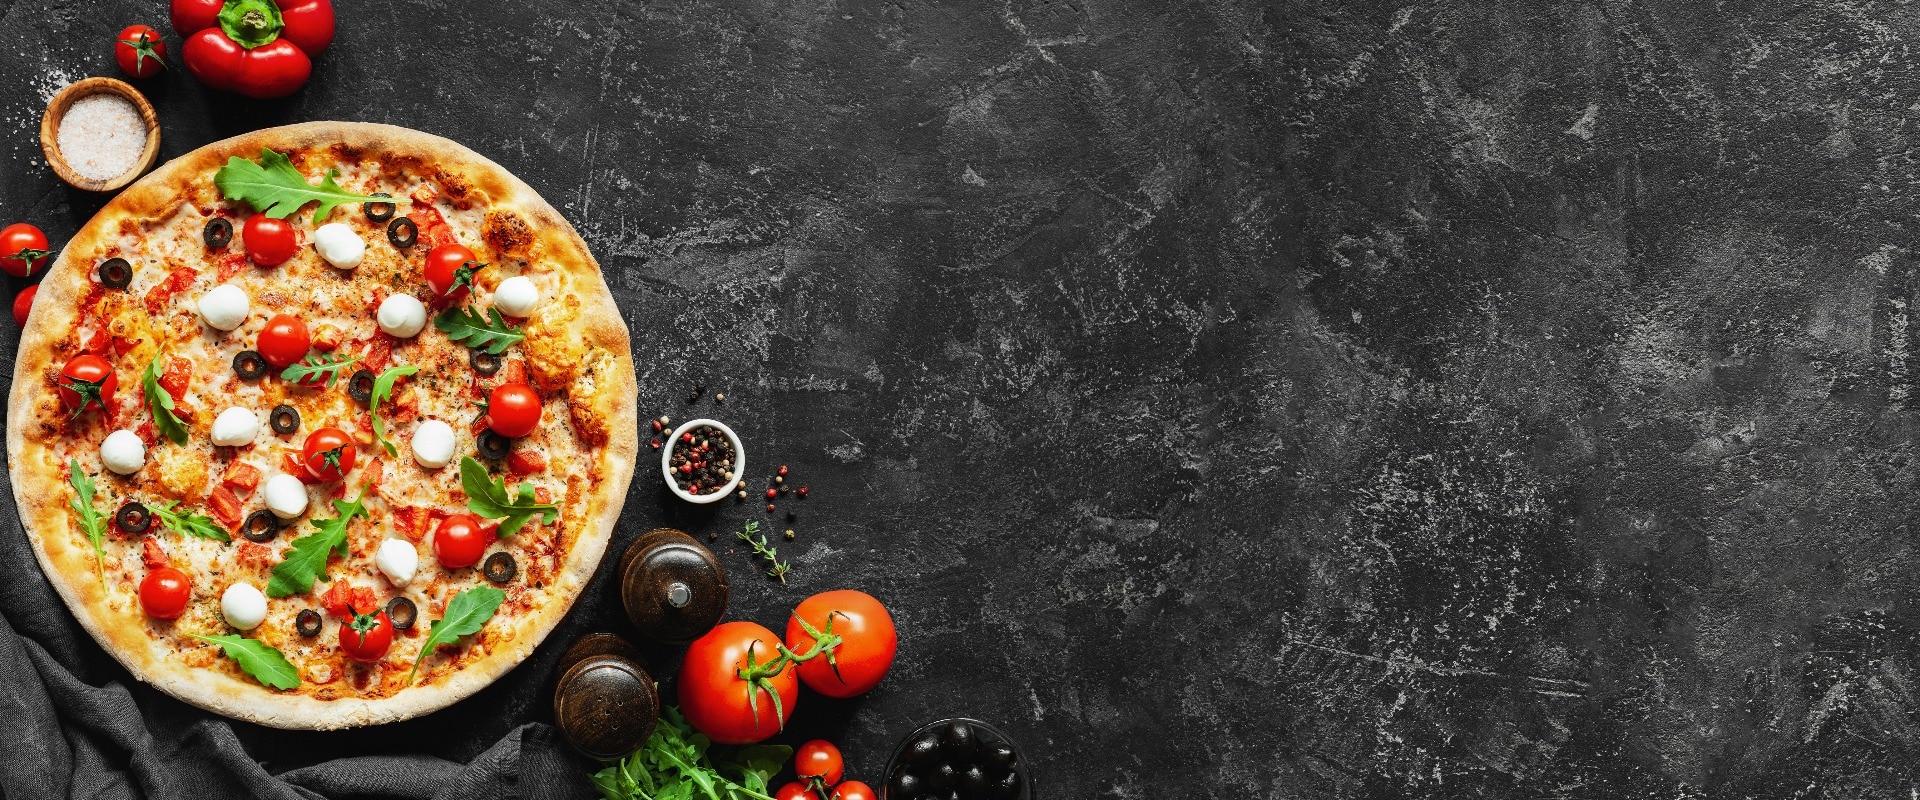 Italian pizza and pizza cooking ingredients on black concrete background. Tomatoes on vine, mozzarella, black olives, herbs and spices. Copy space for text. Banner composition